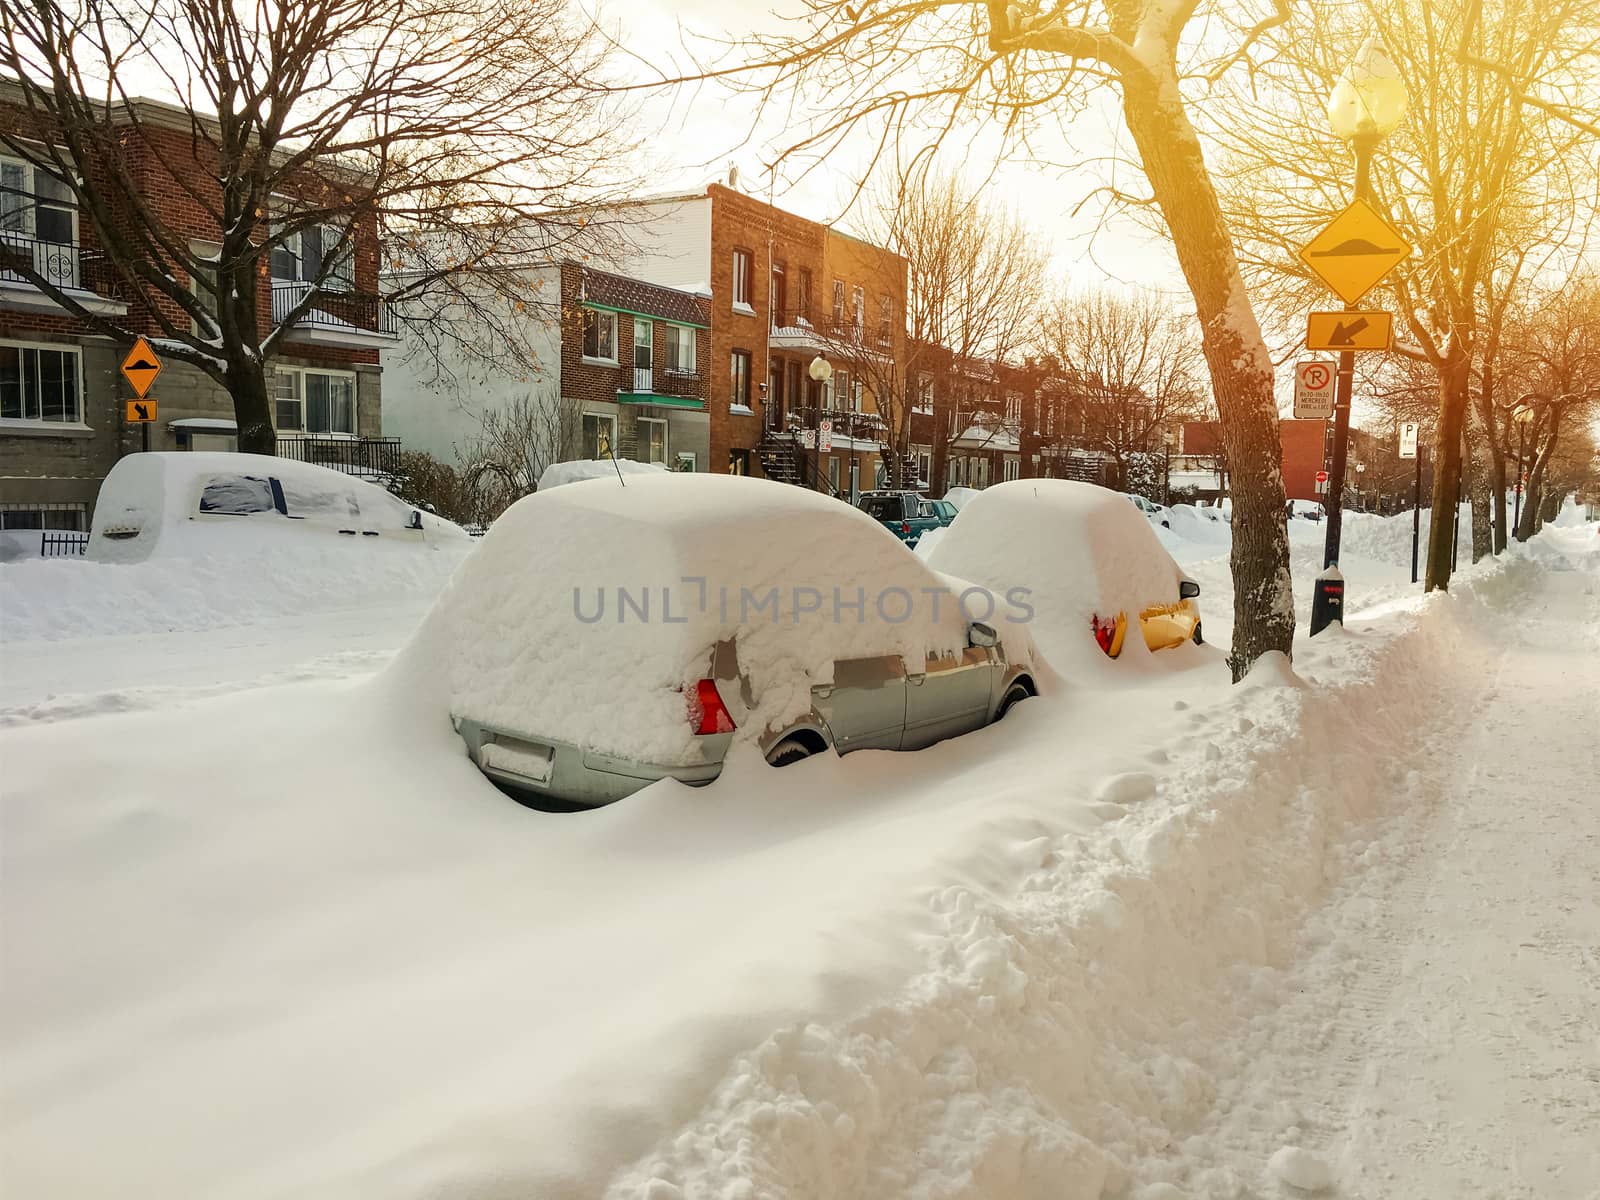 Cars covered with snow on winter street in sunset by anikasalsera